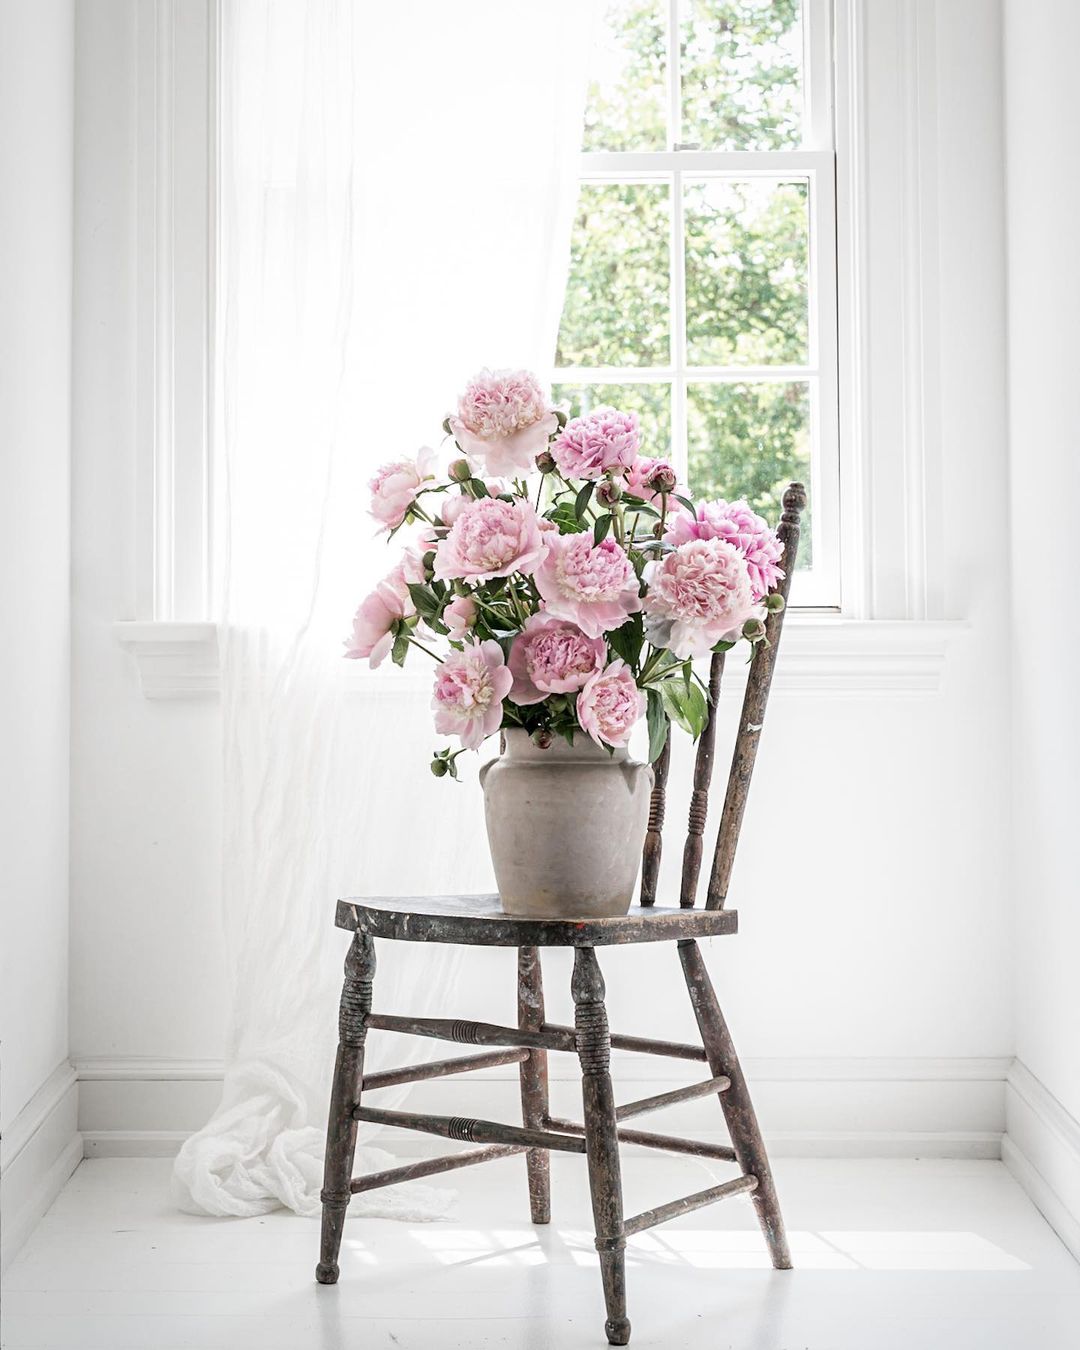 15 Ways to Create a Stunning Romantic Bedroom with Pink Peonies